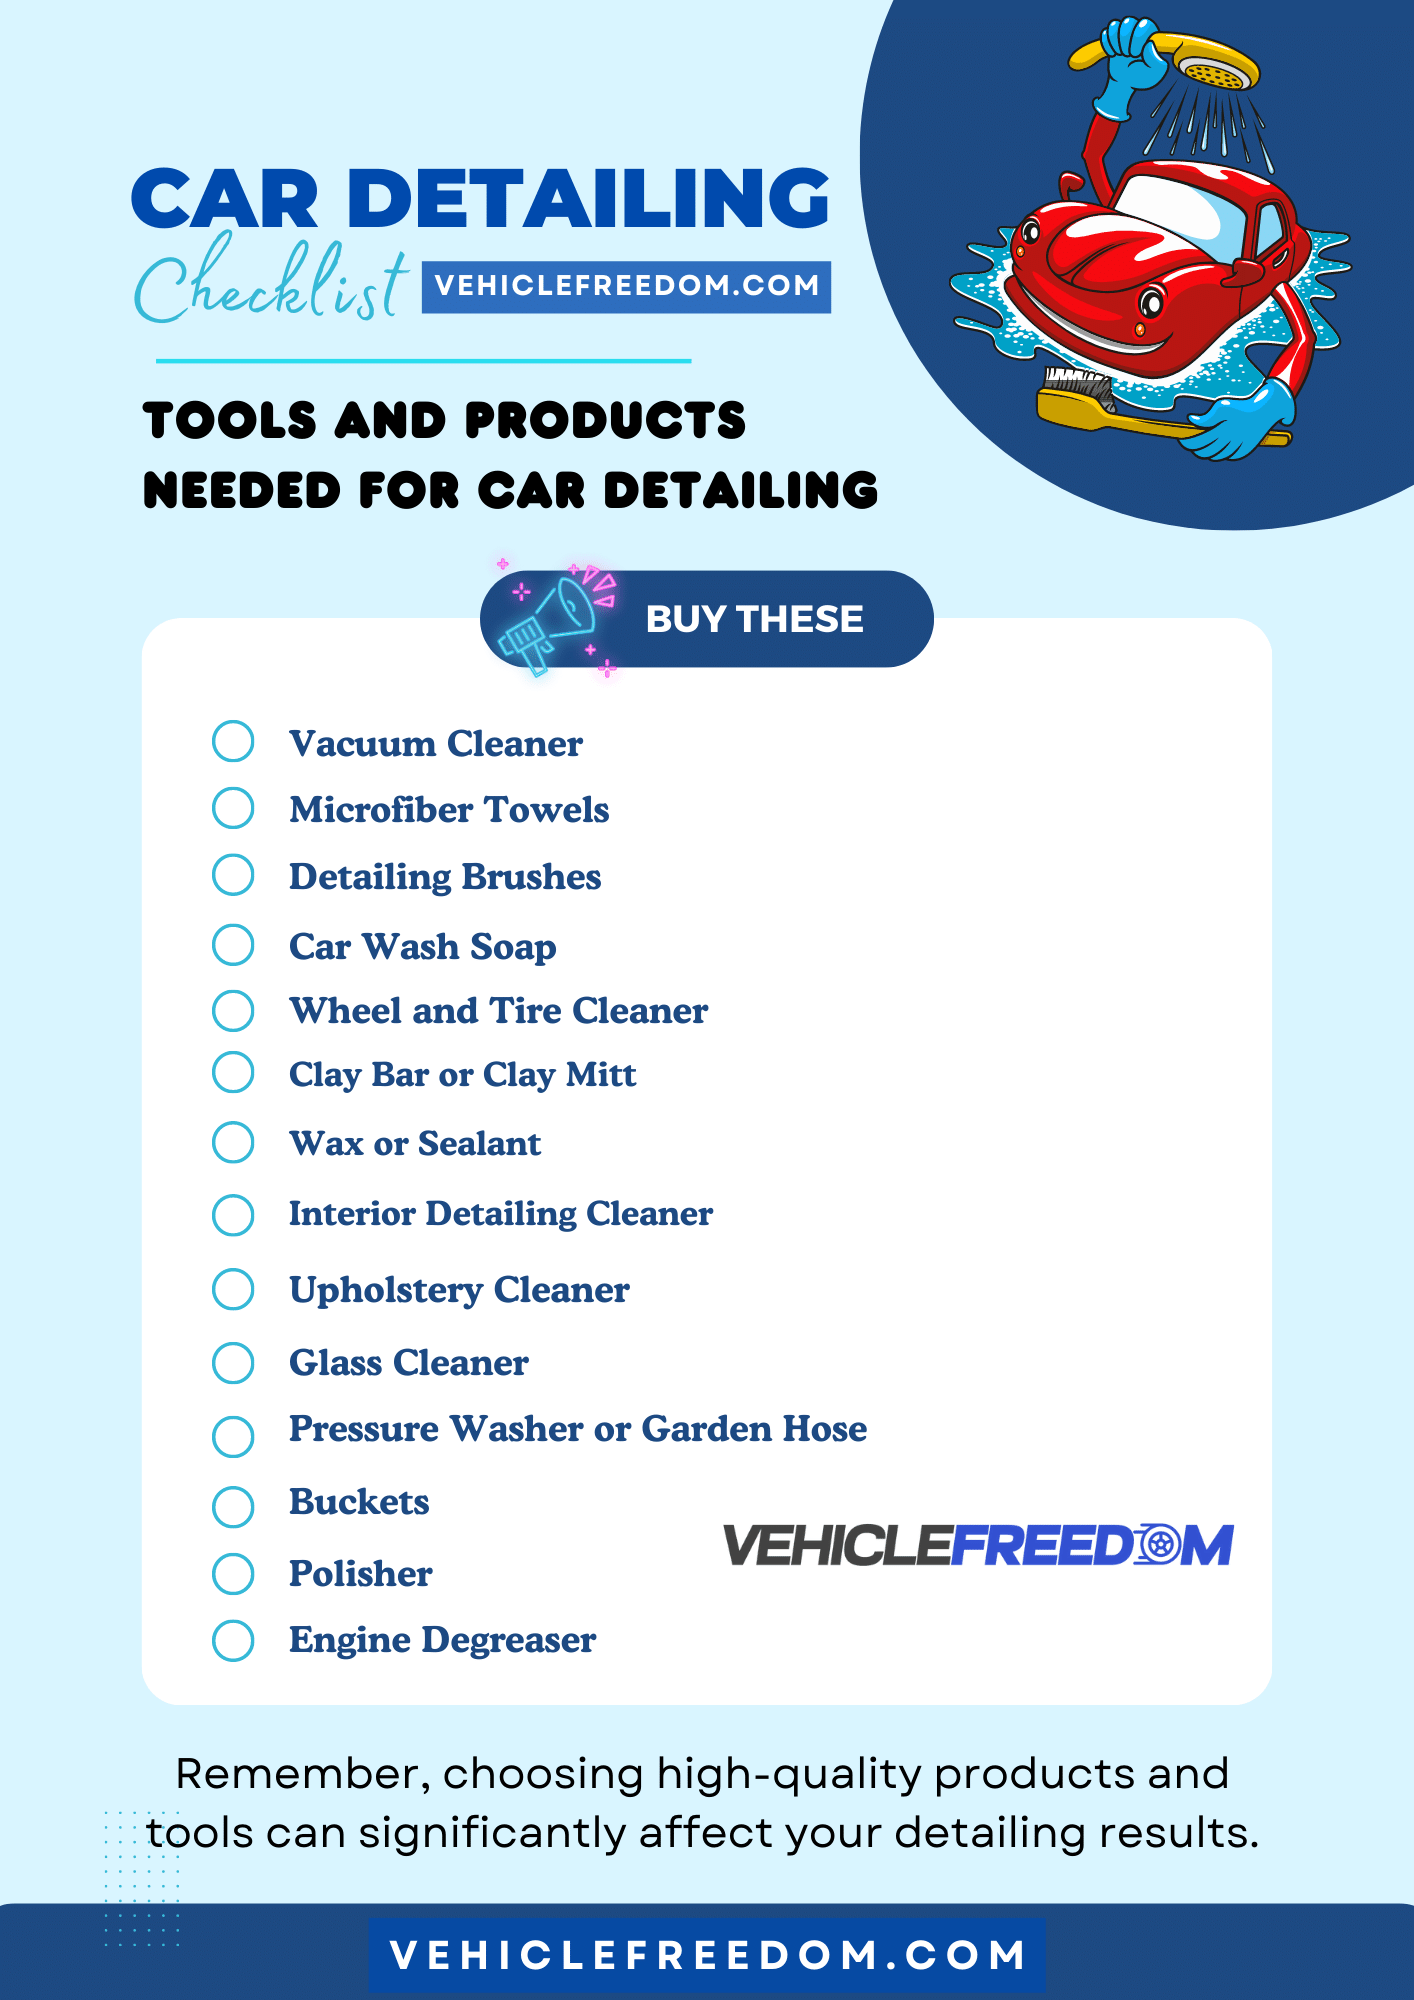 Tools and Products Needed for Car Detailing